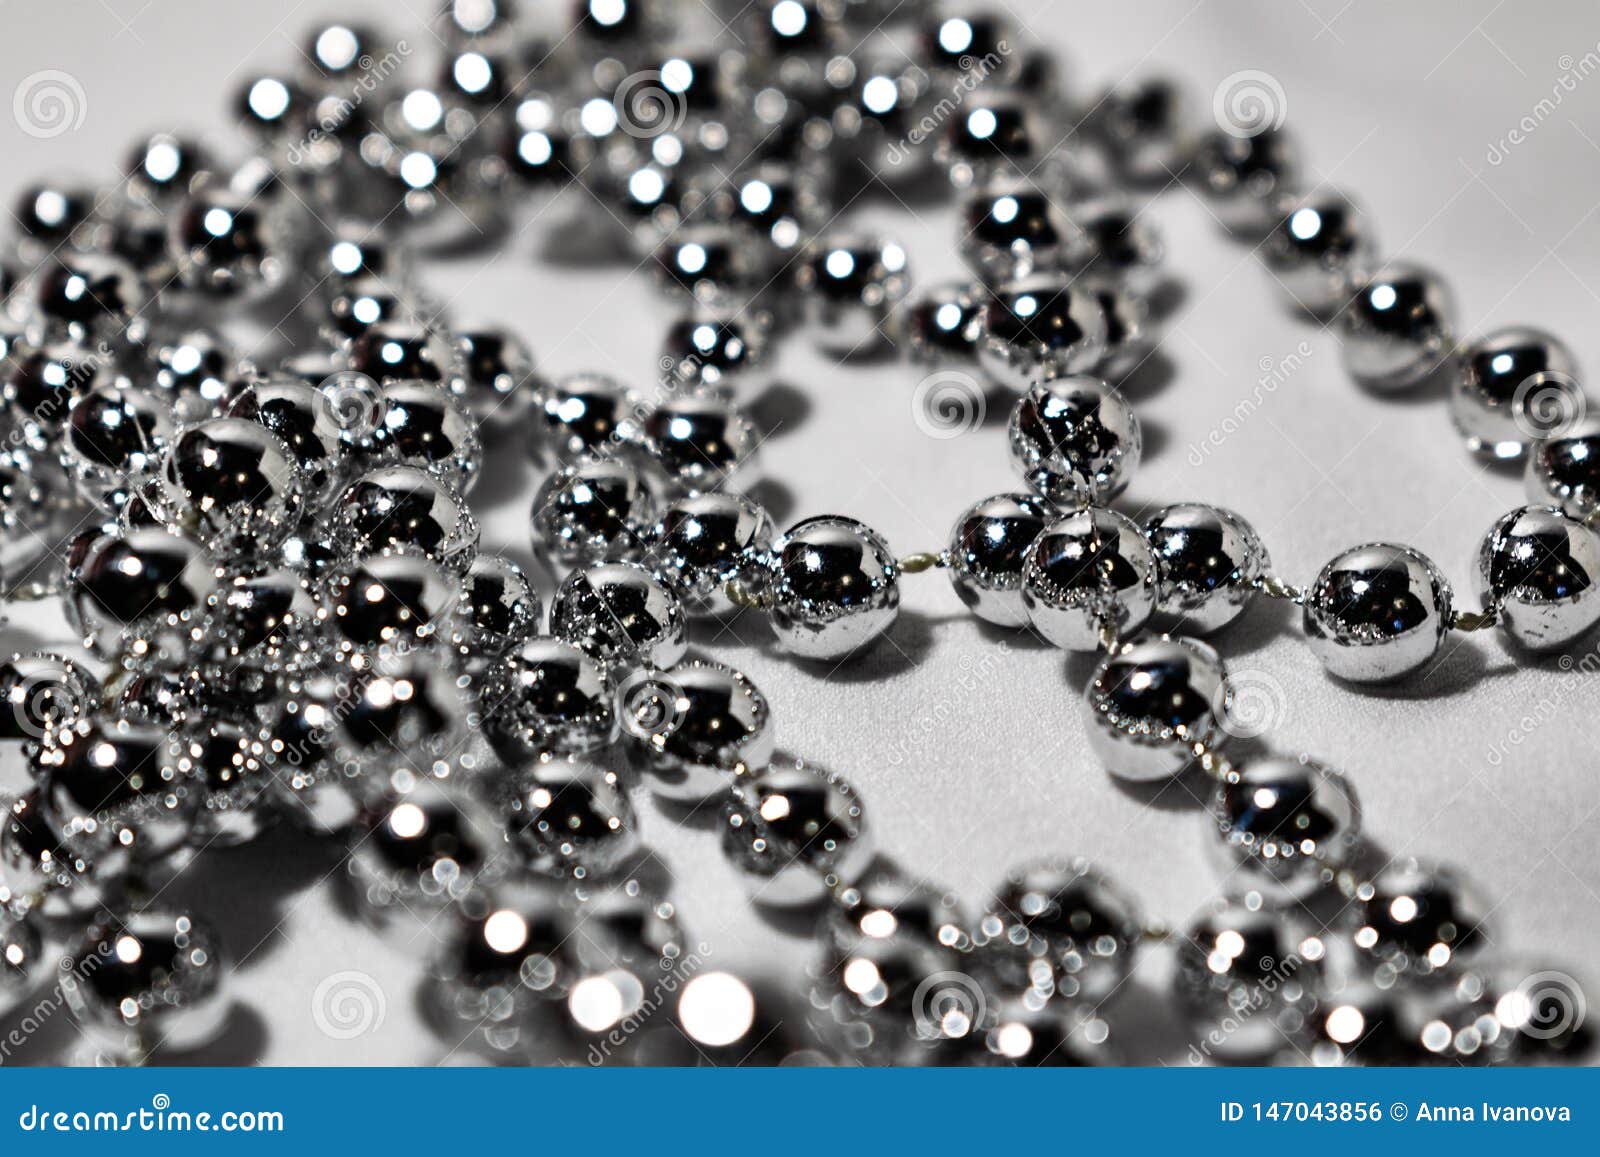 Beautiful Round Silver Beads and Beads on White Fabric Background ...